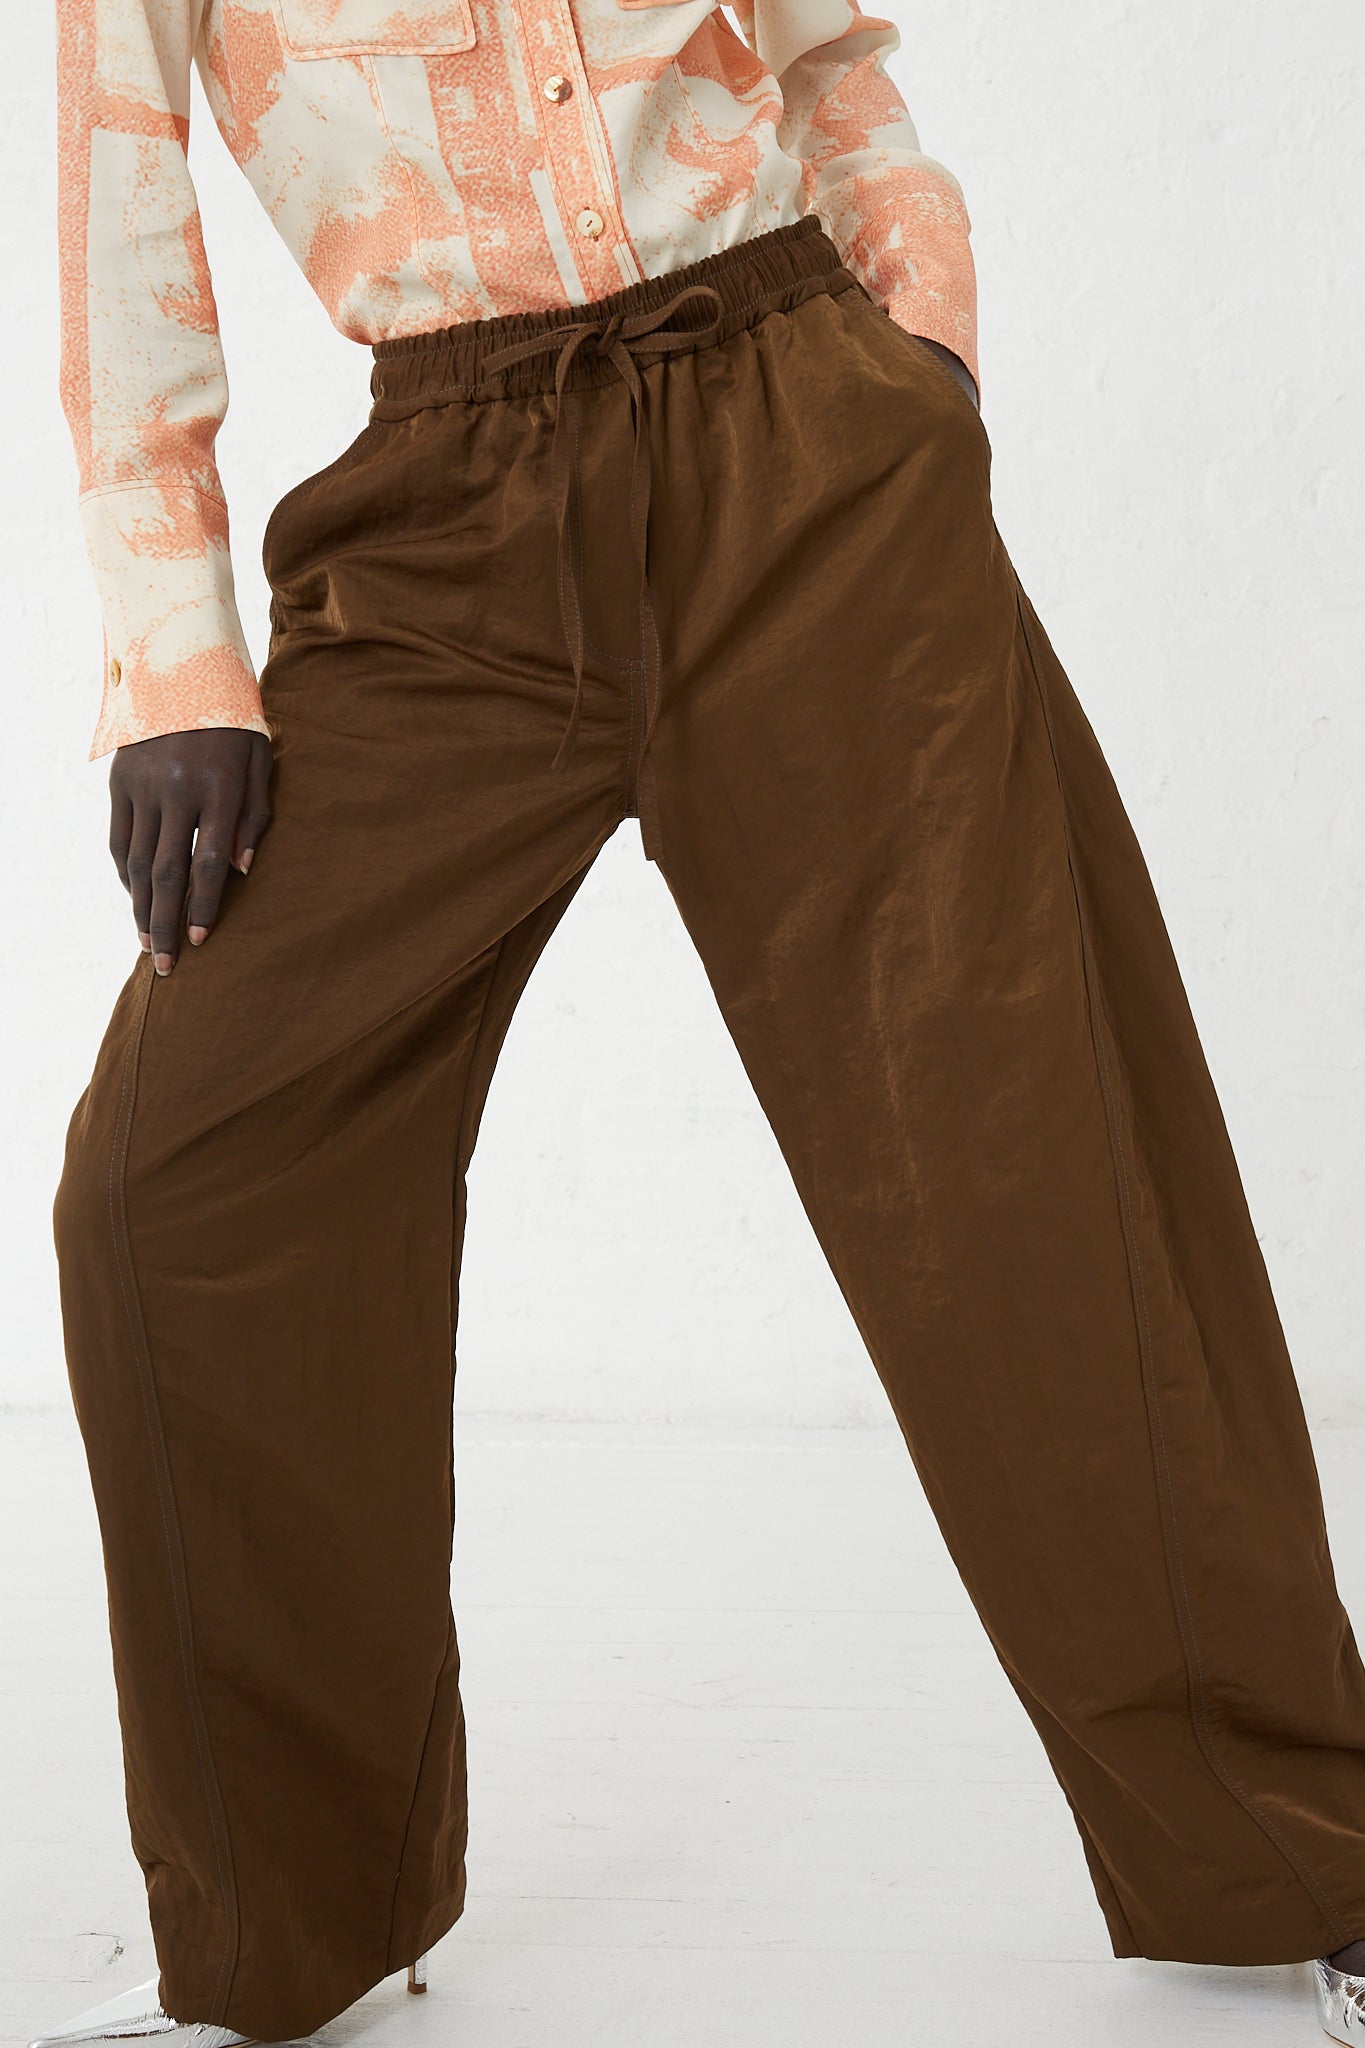 A model in Rejina Pyo's Nylon Una Trousers in Brown with contrast stitching and an elasticated waist.